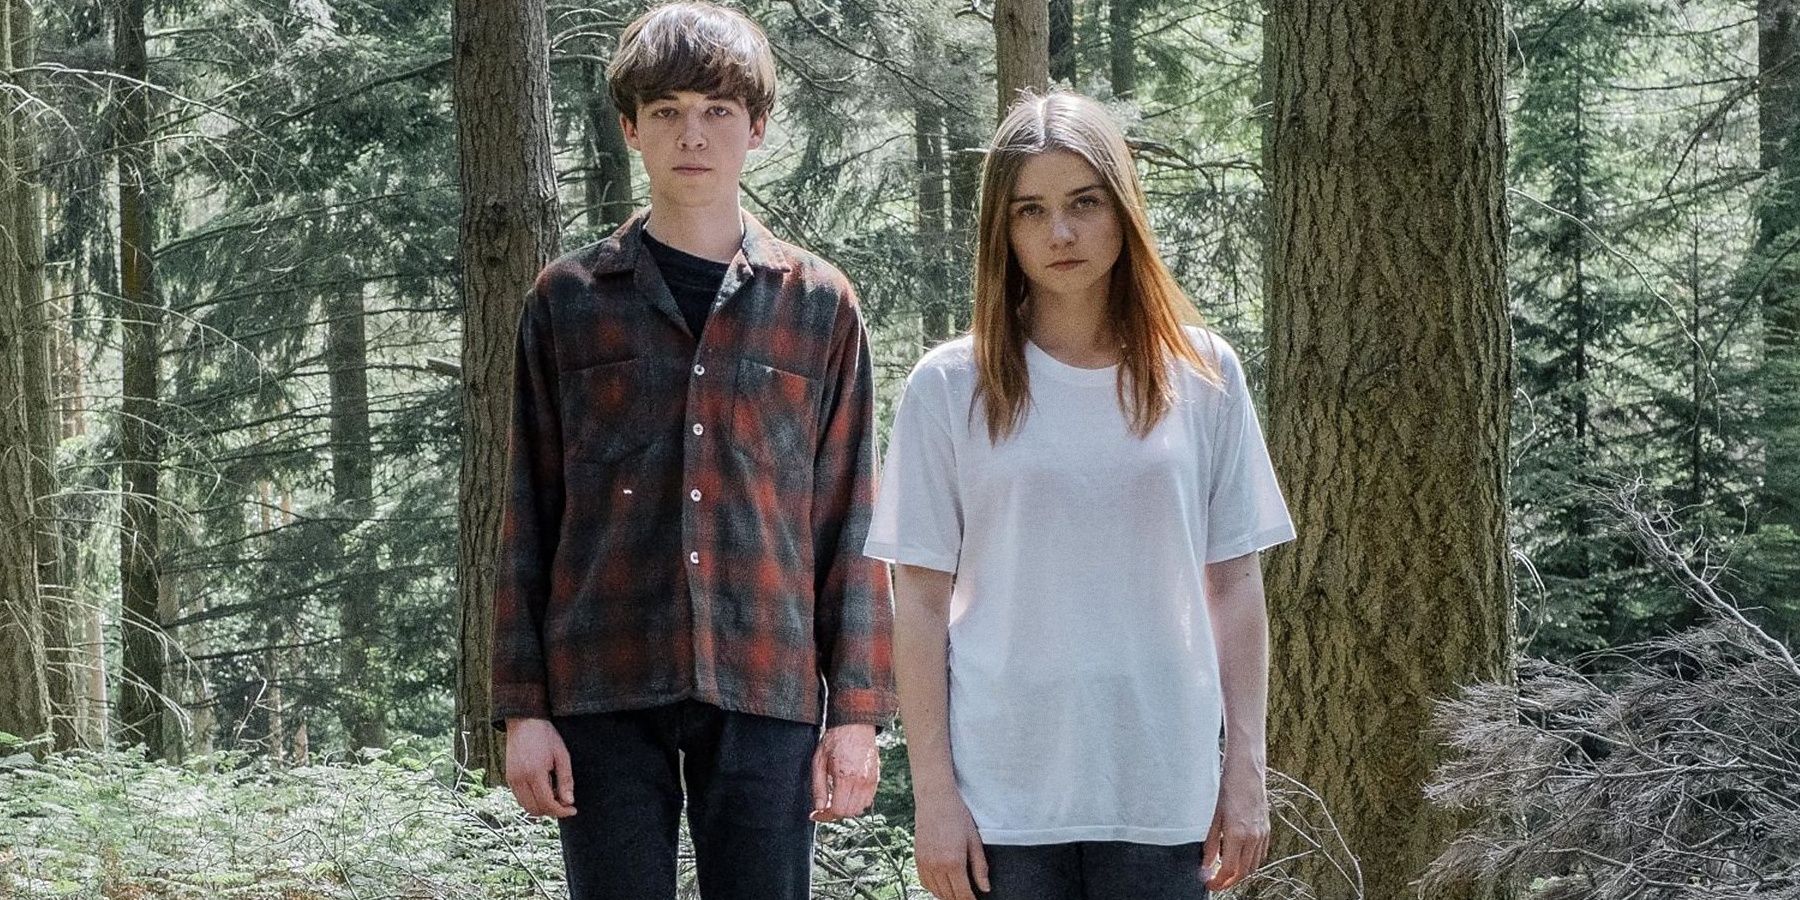 A teenage boy and girl stand in the middle of the woods staring directly at the camera in The End of the Fing World